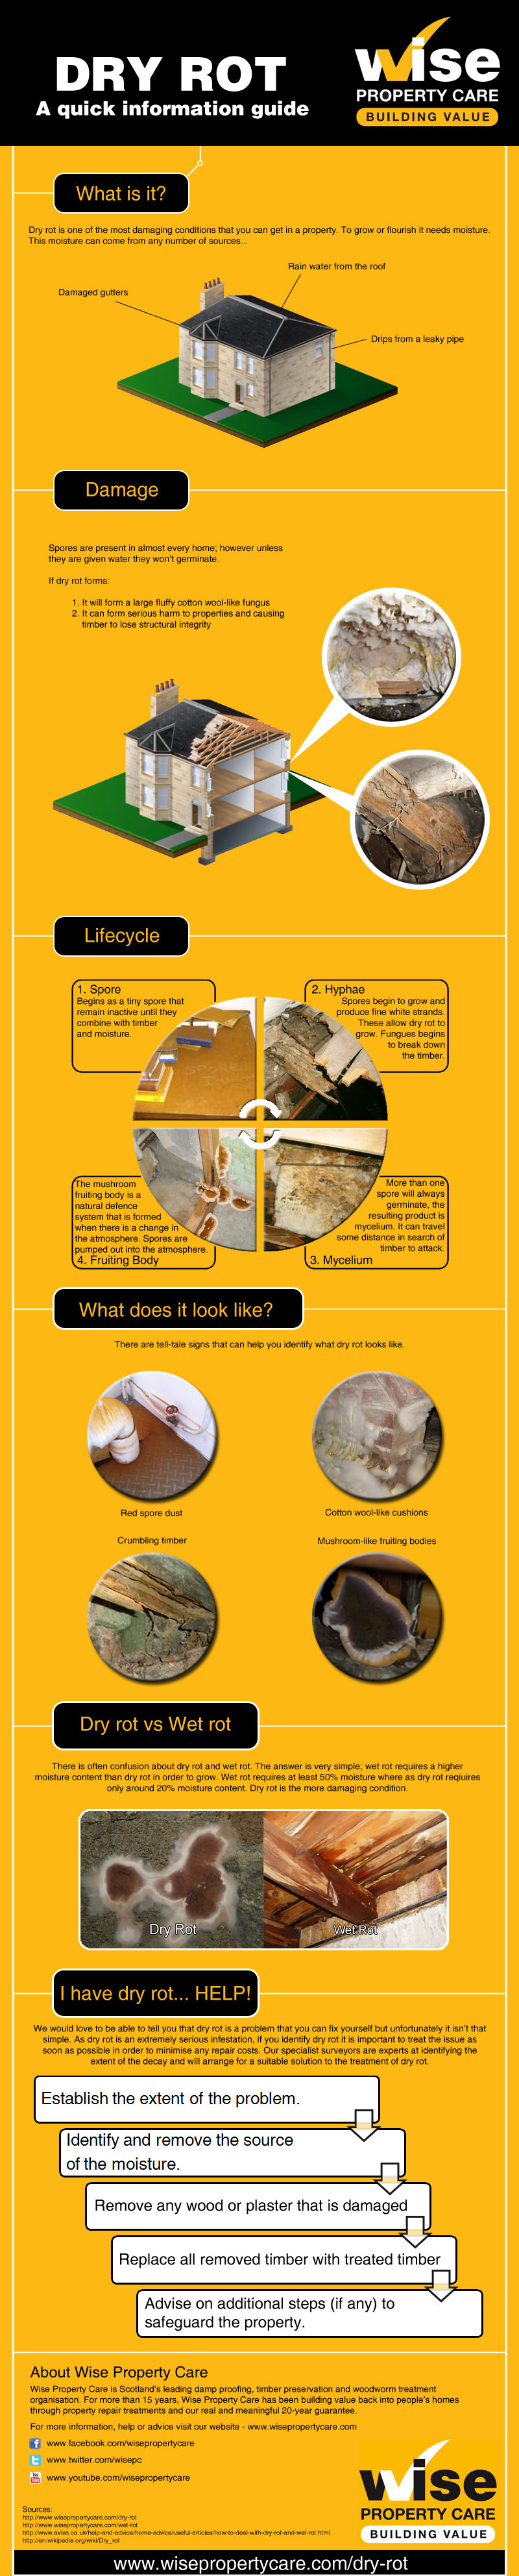 Dry Rot: A Quick Information Guide